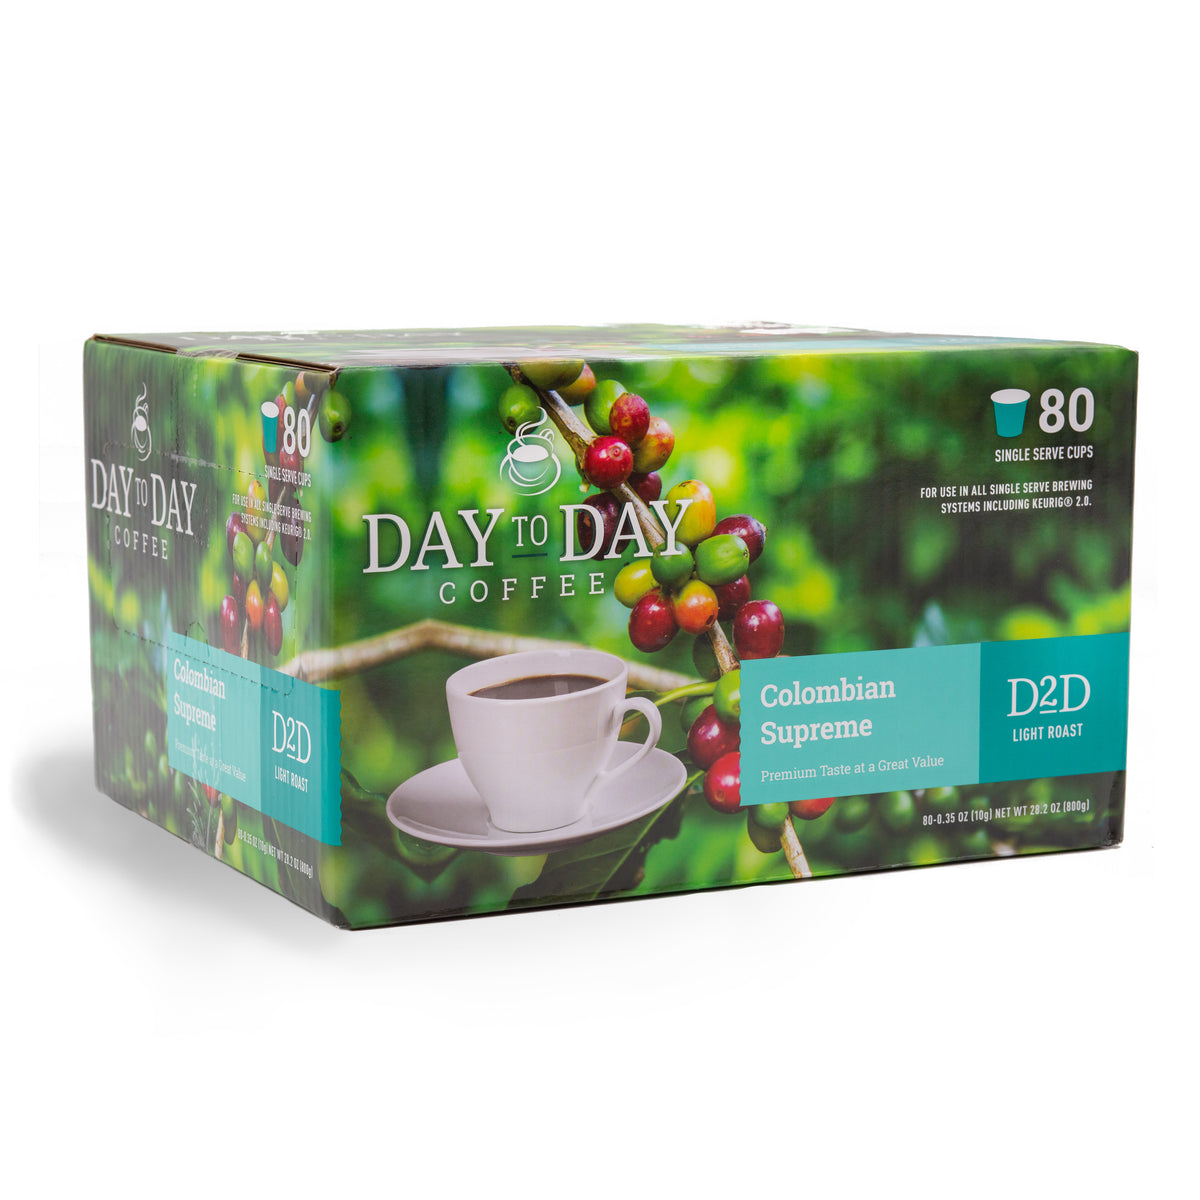 Day to day coffee 80 count colombian supreme light roast coffee pods for single serve coffee brewer